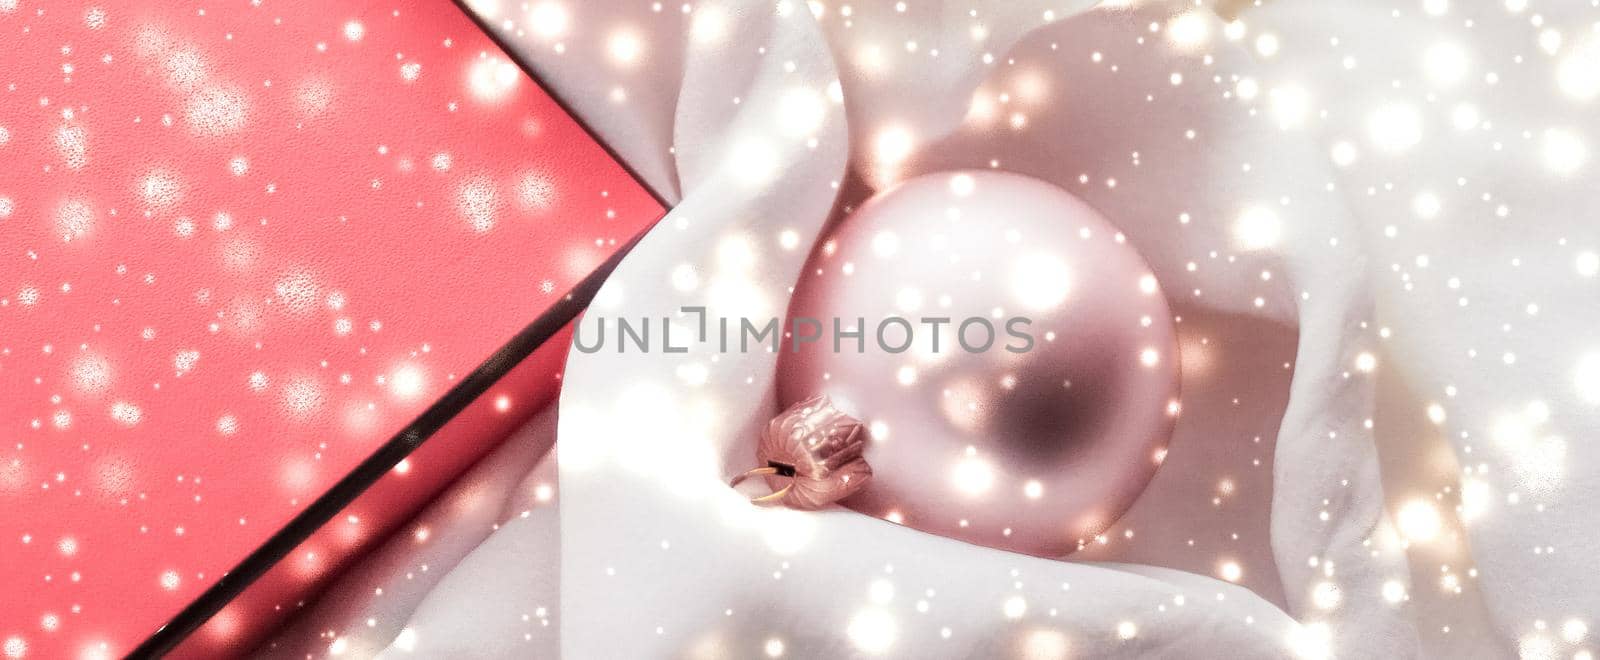 Holidays branding, glamour and decoration concept - Christmas magic holiday background, festive baubles, coral vintage gift box and golden glitter as winter season present for luxury brand design